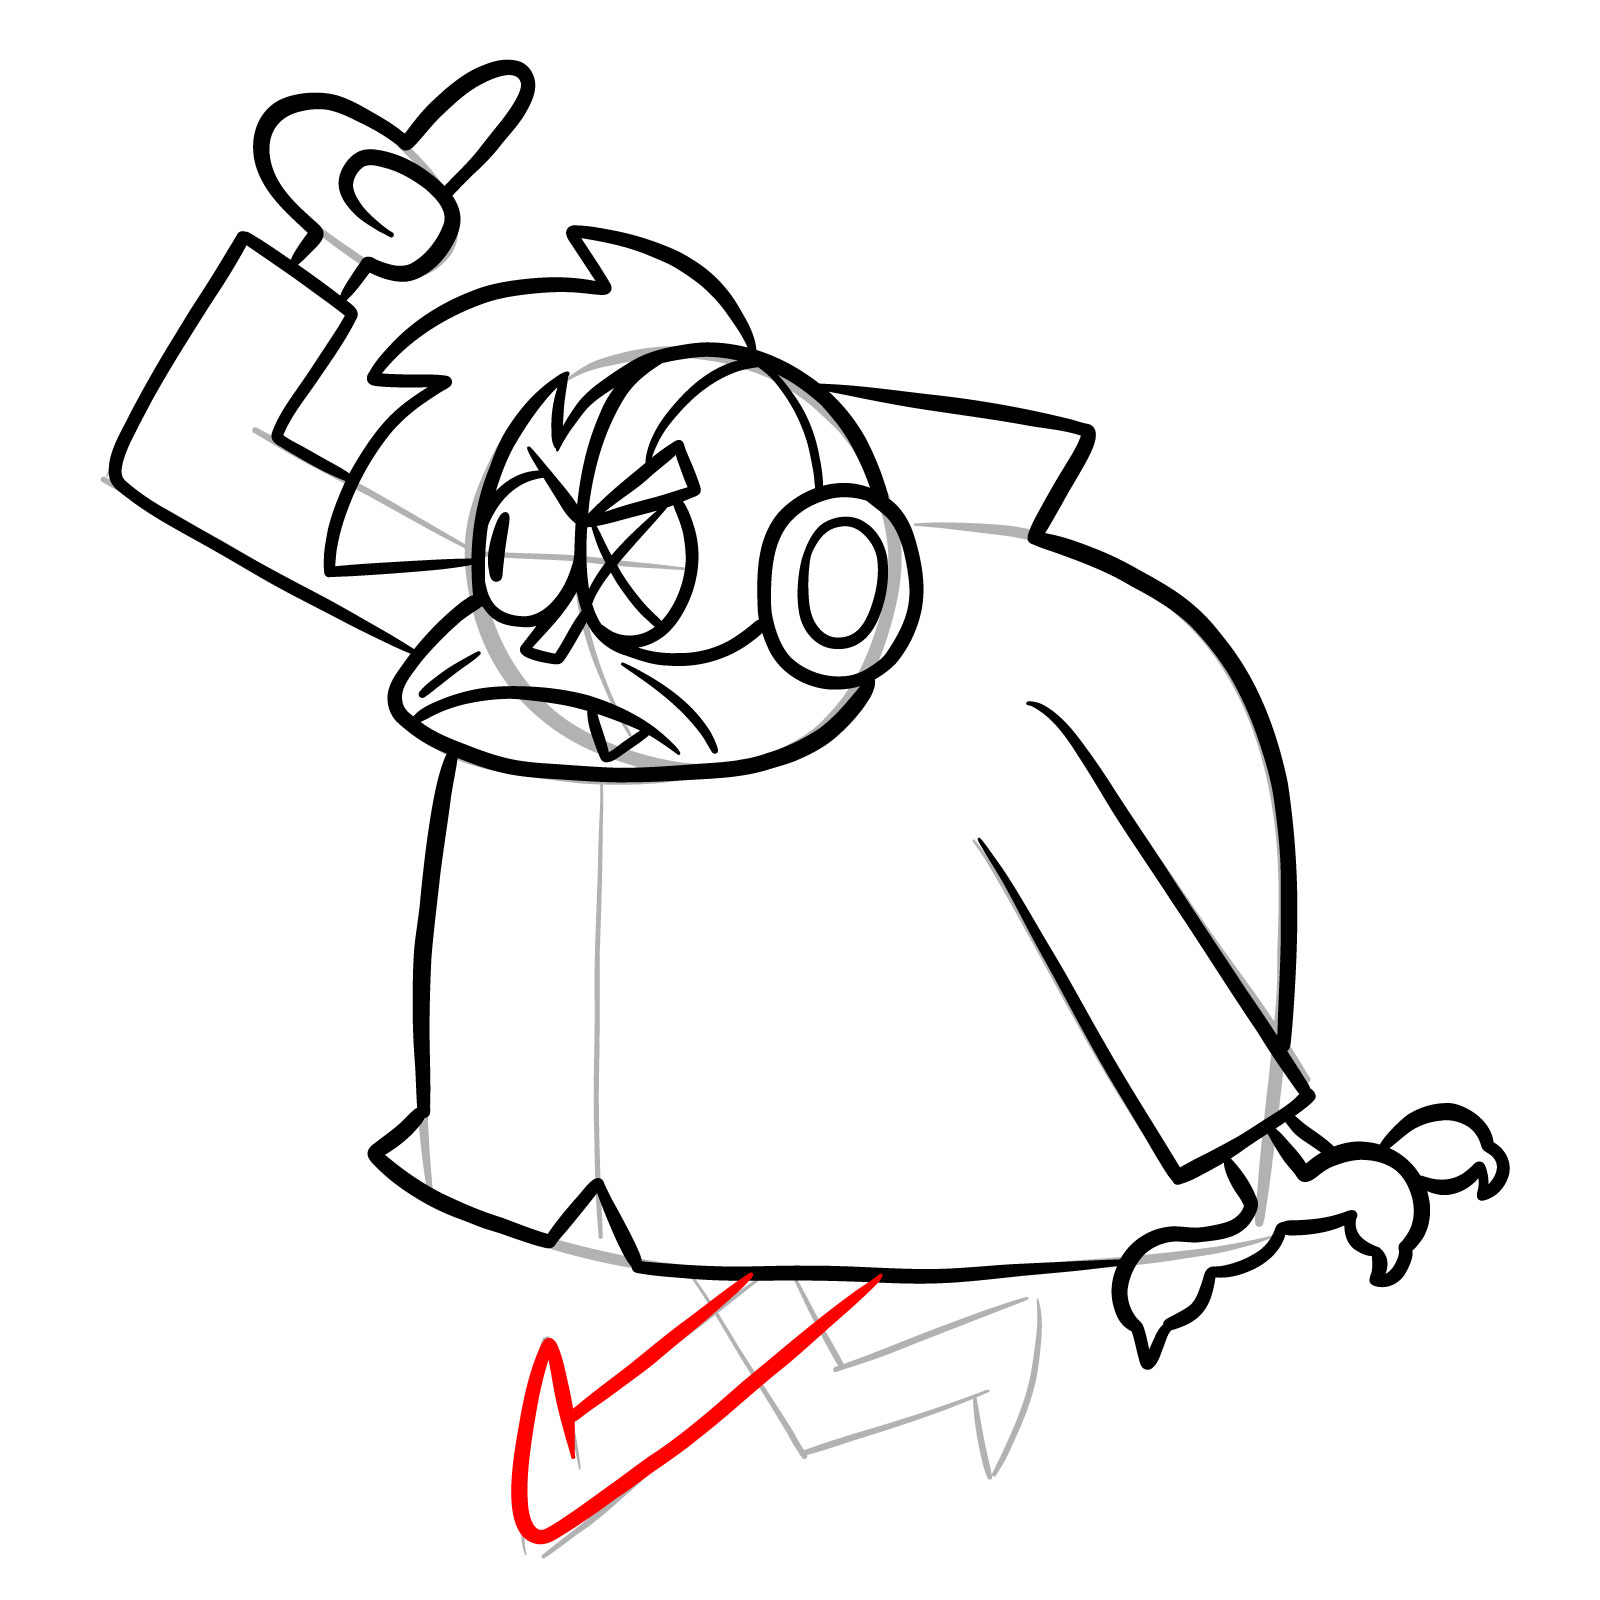 How to draw Lord Boxman from OK K.O.! - step 20